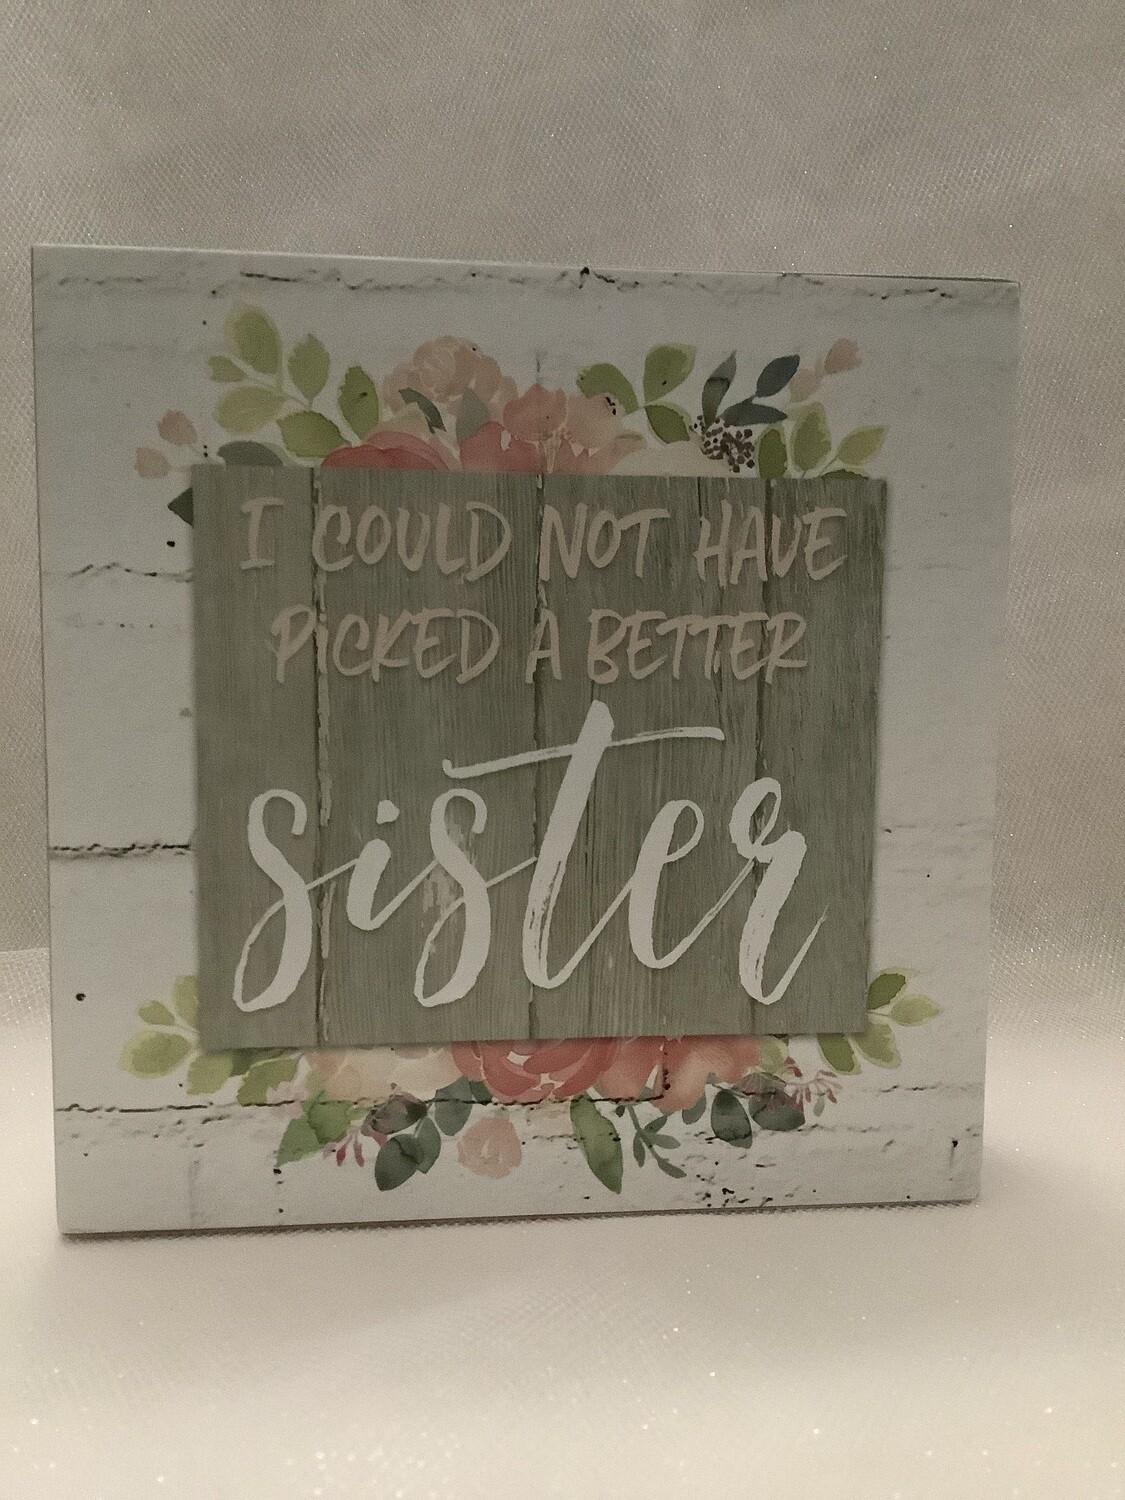 I Could Not Have Picked a Better Sister Box Sign